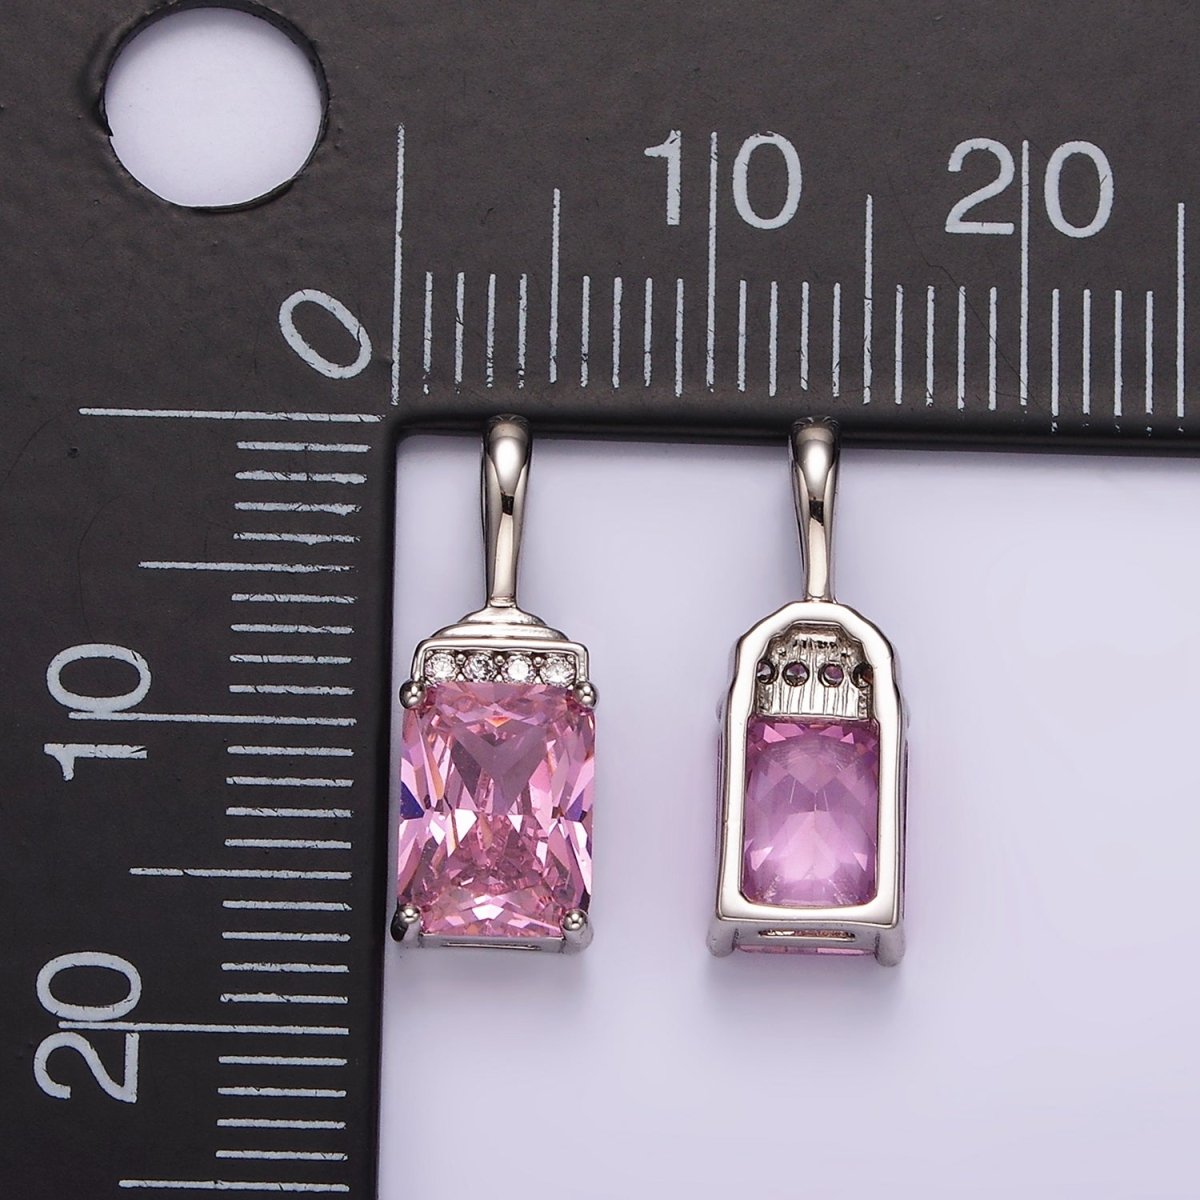 White Gold Filled Pink Baguette Micro Paved CZ Bail Pendant | AA1126 - DLUXCA